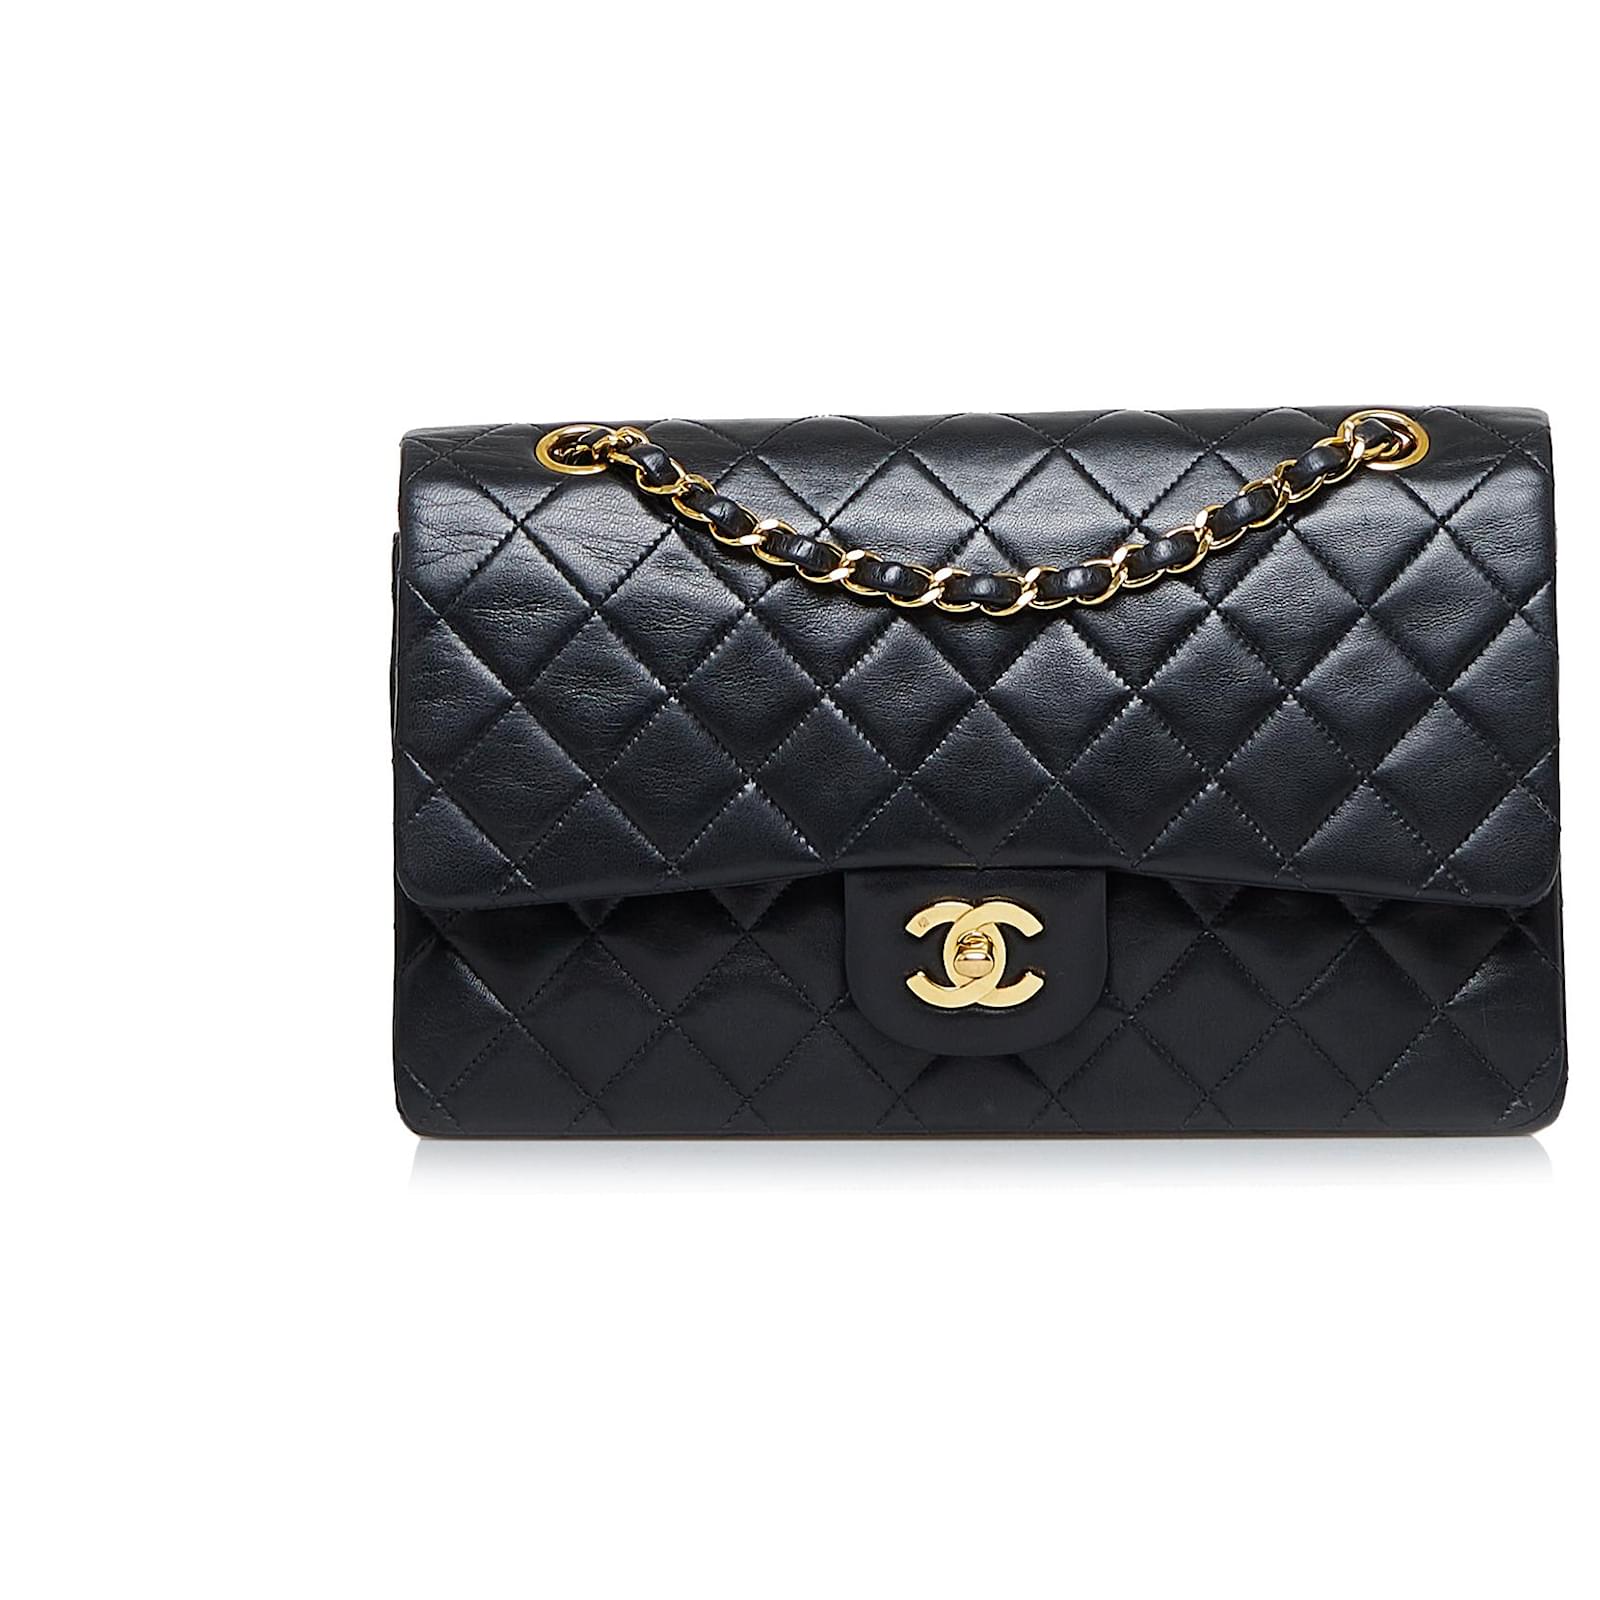 Pre-Owned Authenticated Chanel Small Classic Lambskin Double Flap Bag  Leather Black Shoulder Bag Women (Good) 